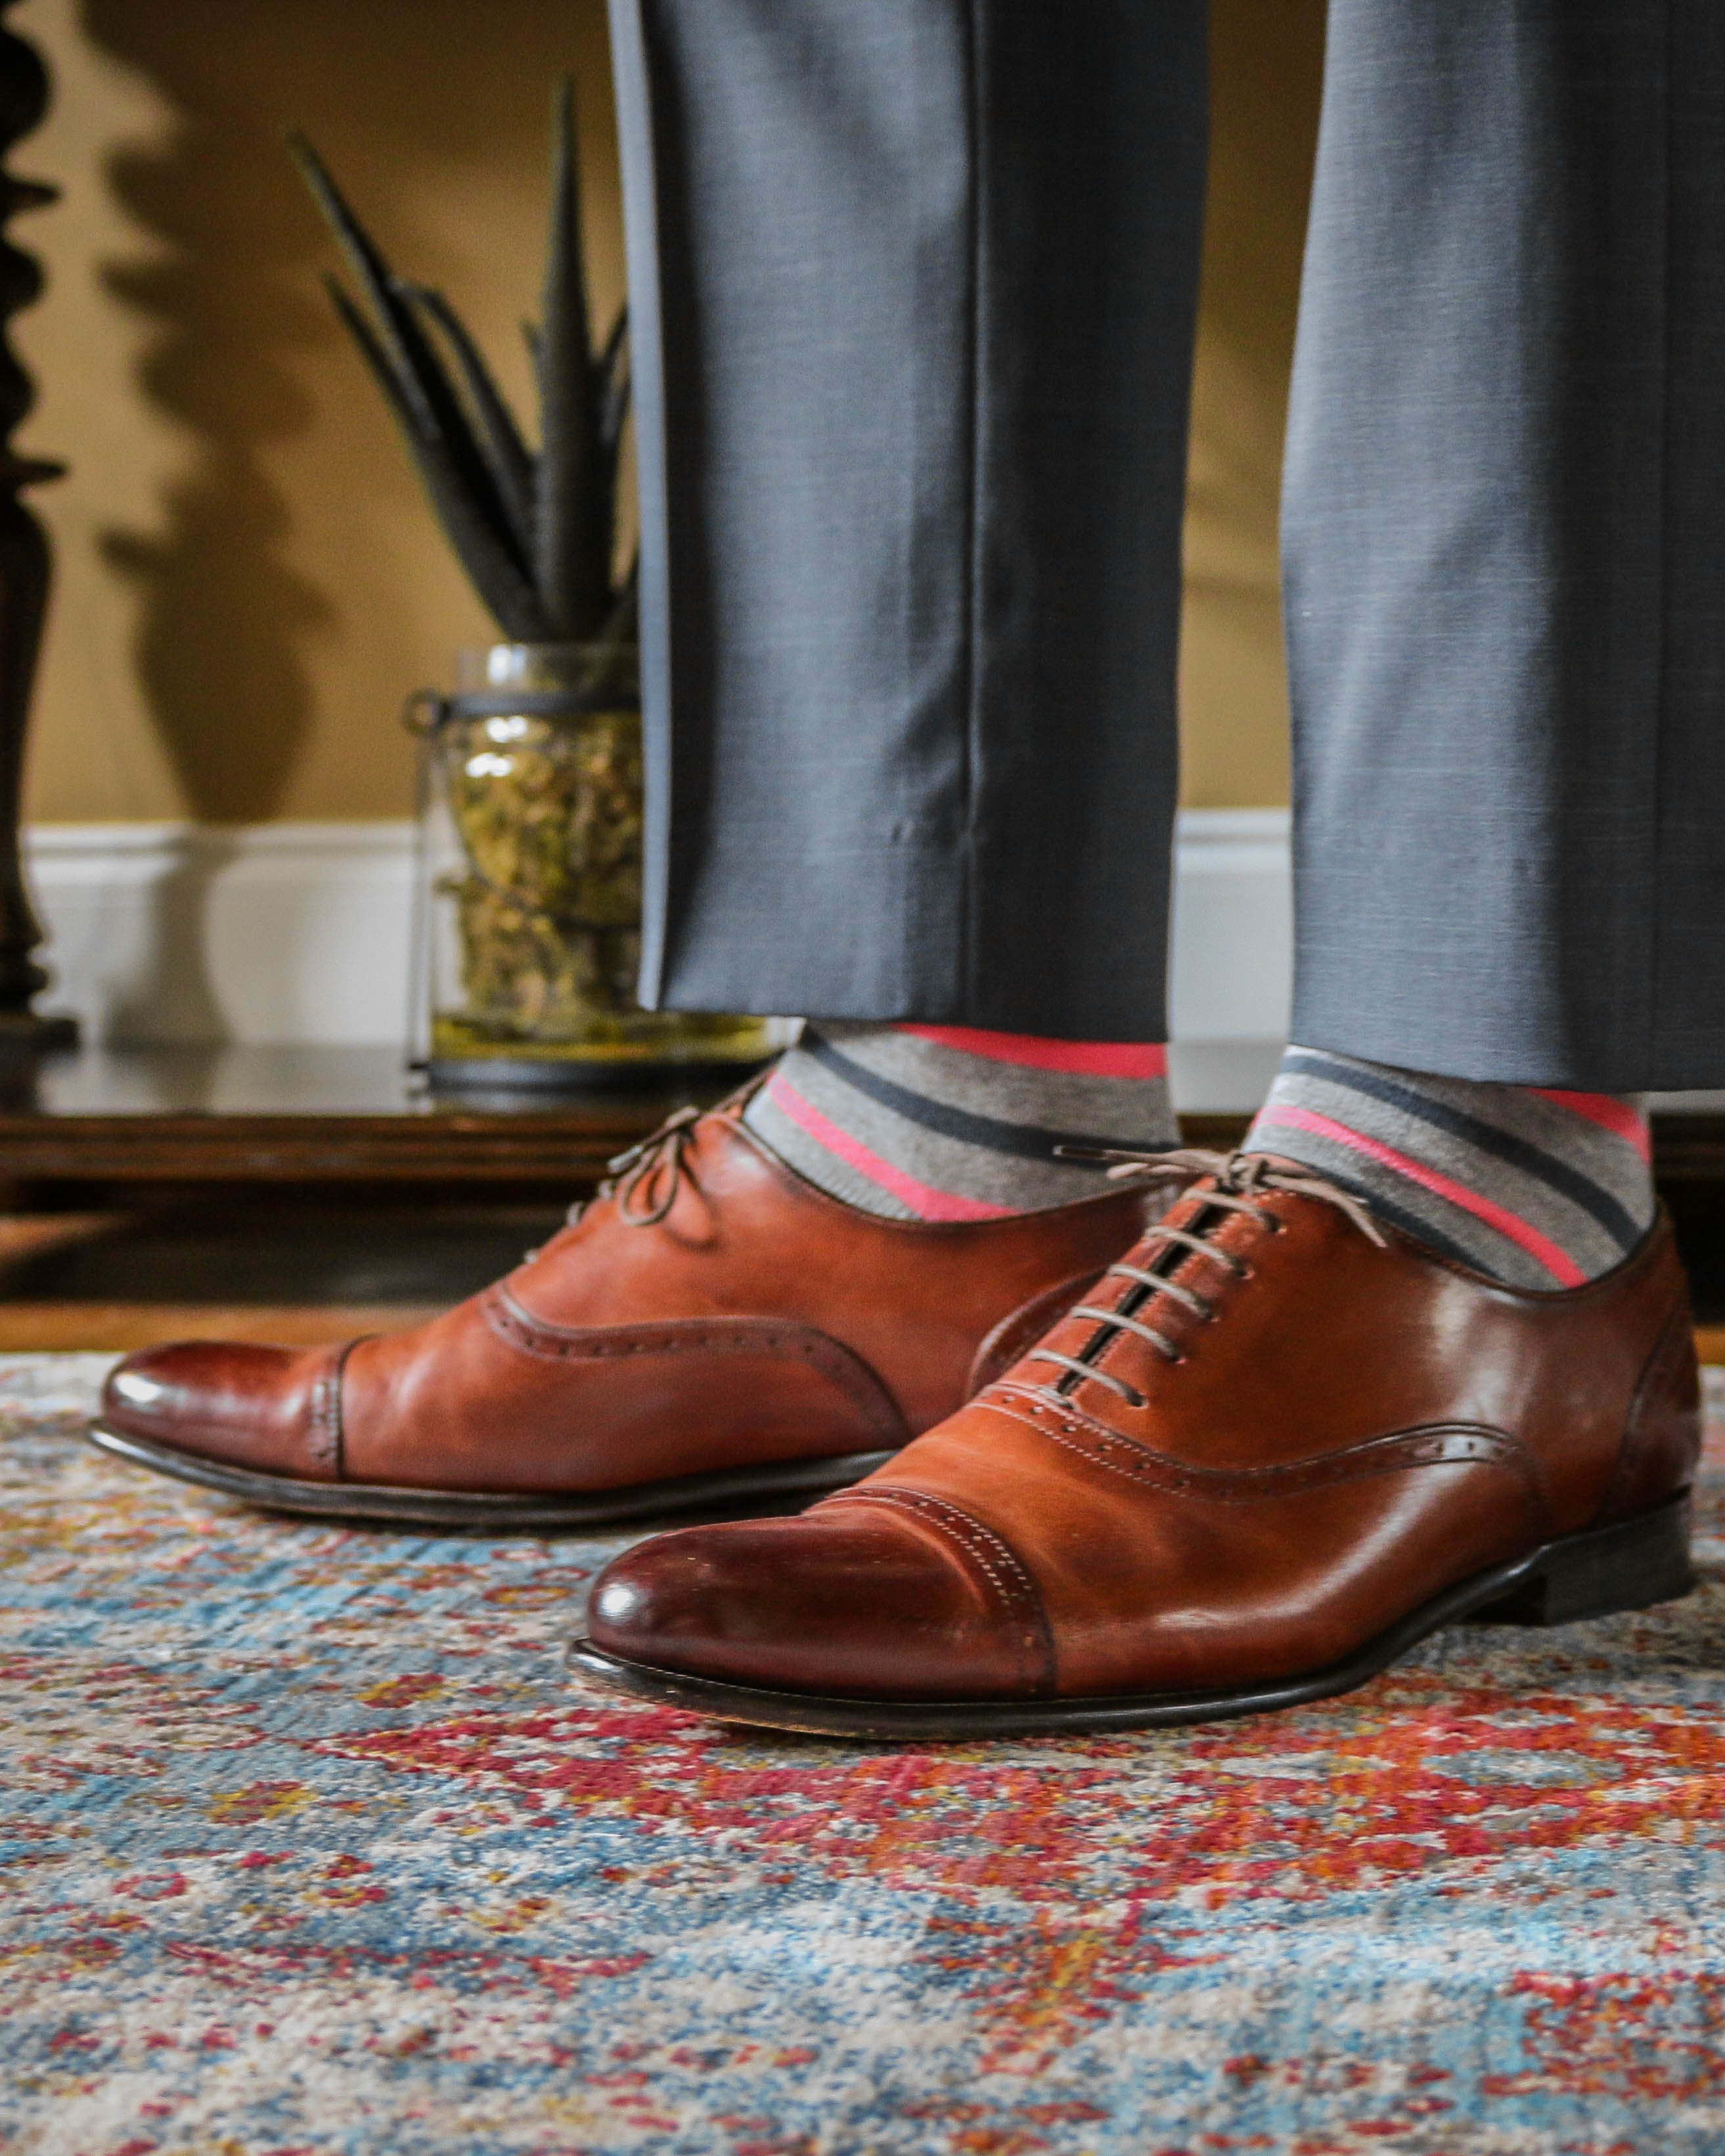 light grey over the calf dress socks with pink and grey stripes, brown dress shoes, grey dress pants